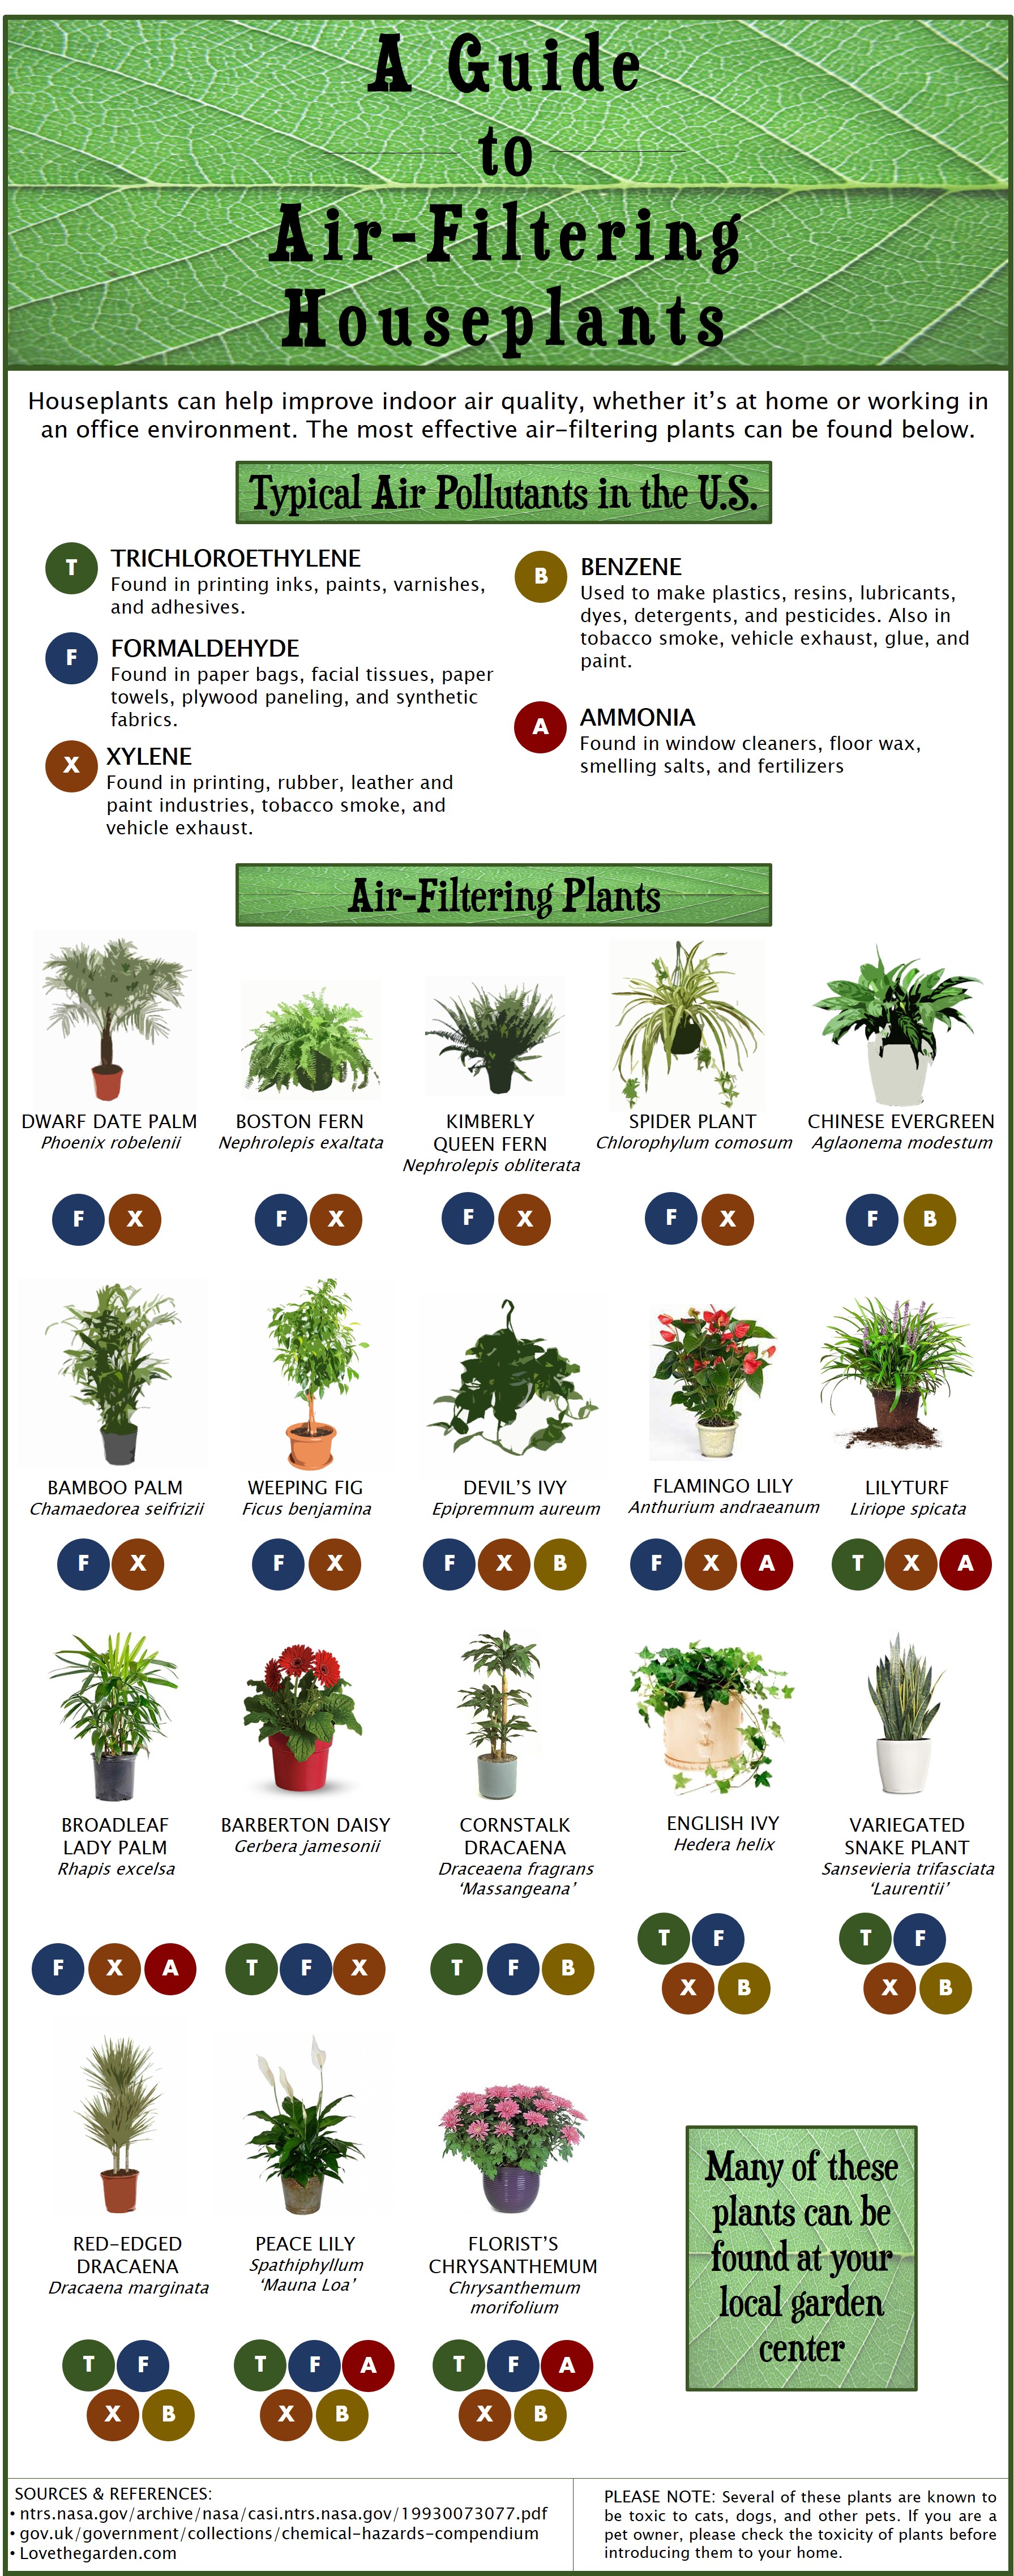 A Guide to Air-Filtering House Plants2